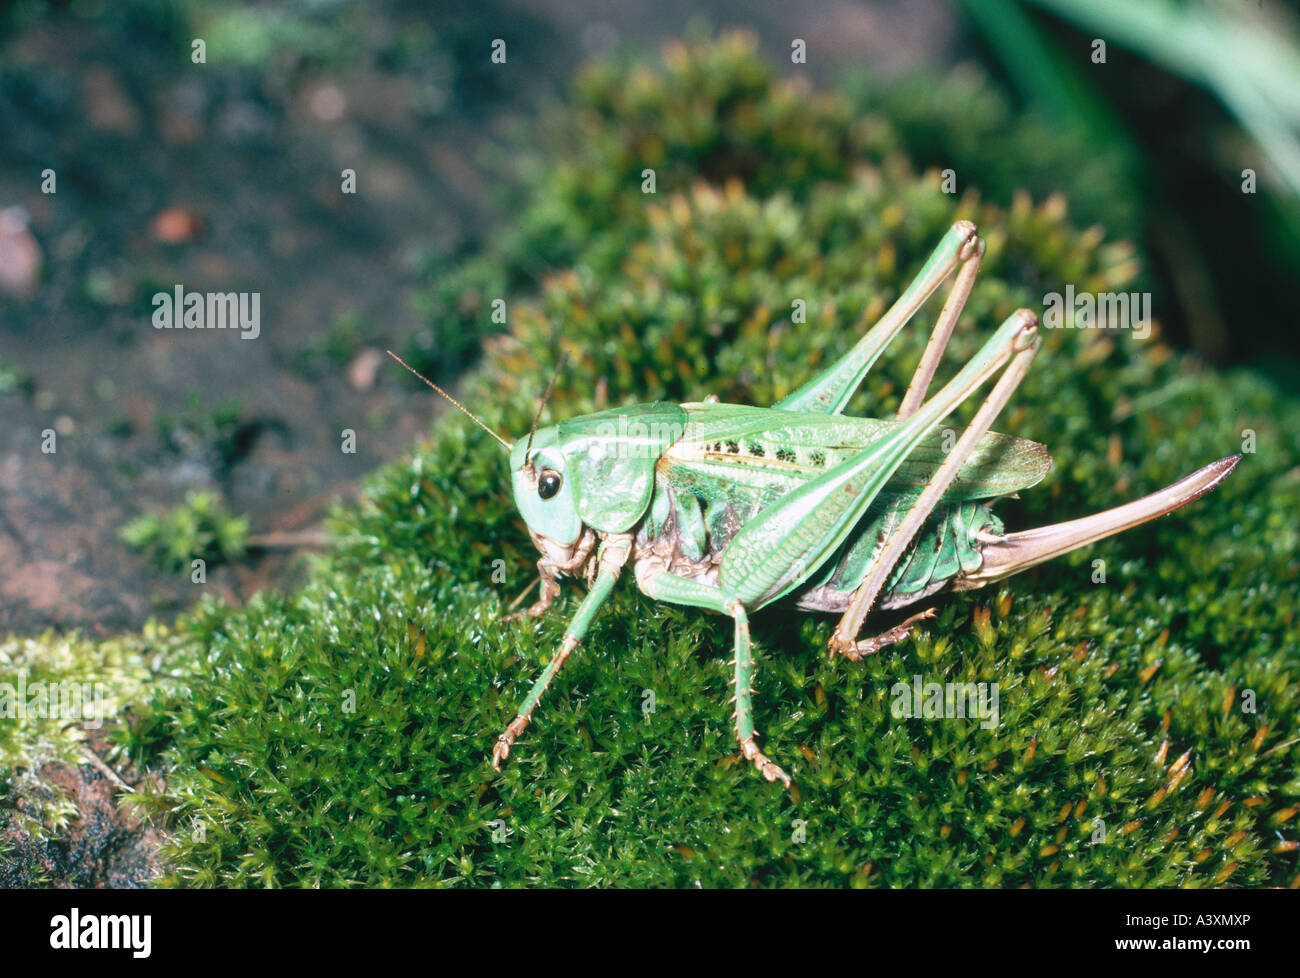 zoology / animals, insects, locust, Wart-biter, (Decticus verrucivorus), female locust with ovipositor, sitting in moss, distrib Stock Photo